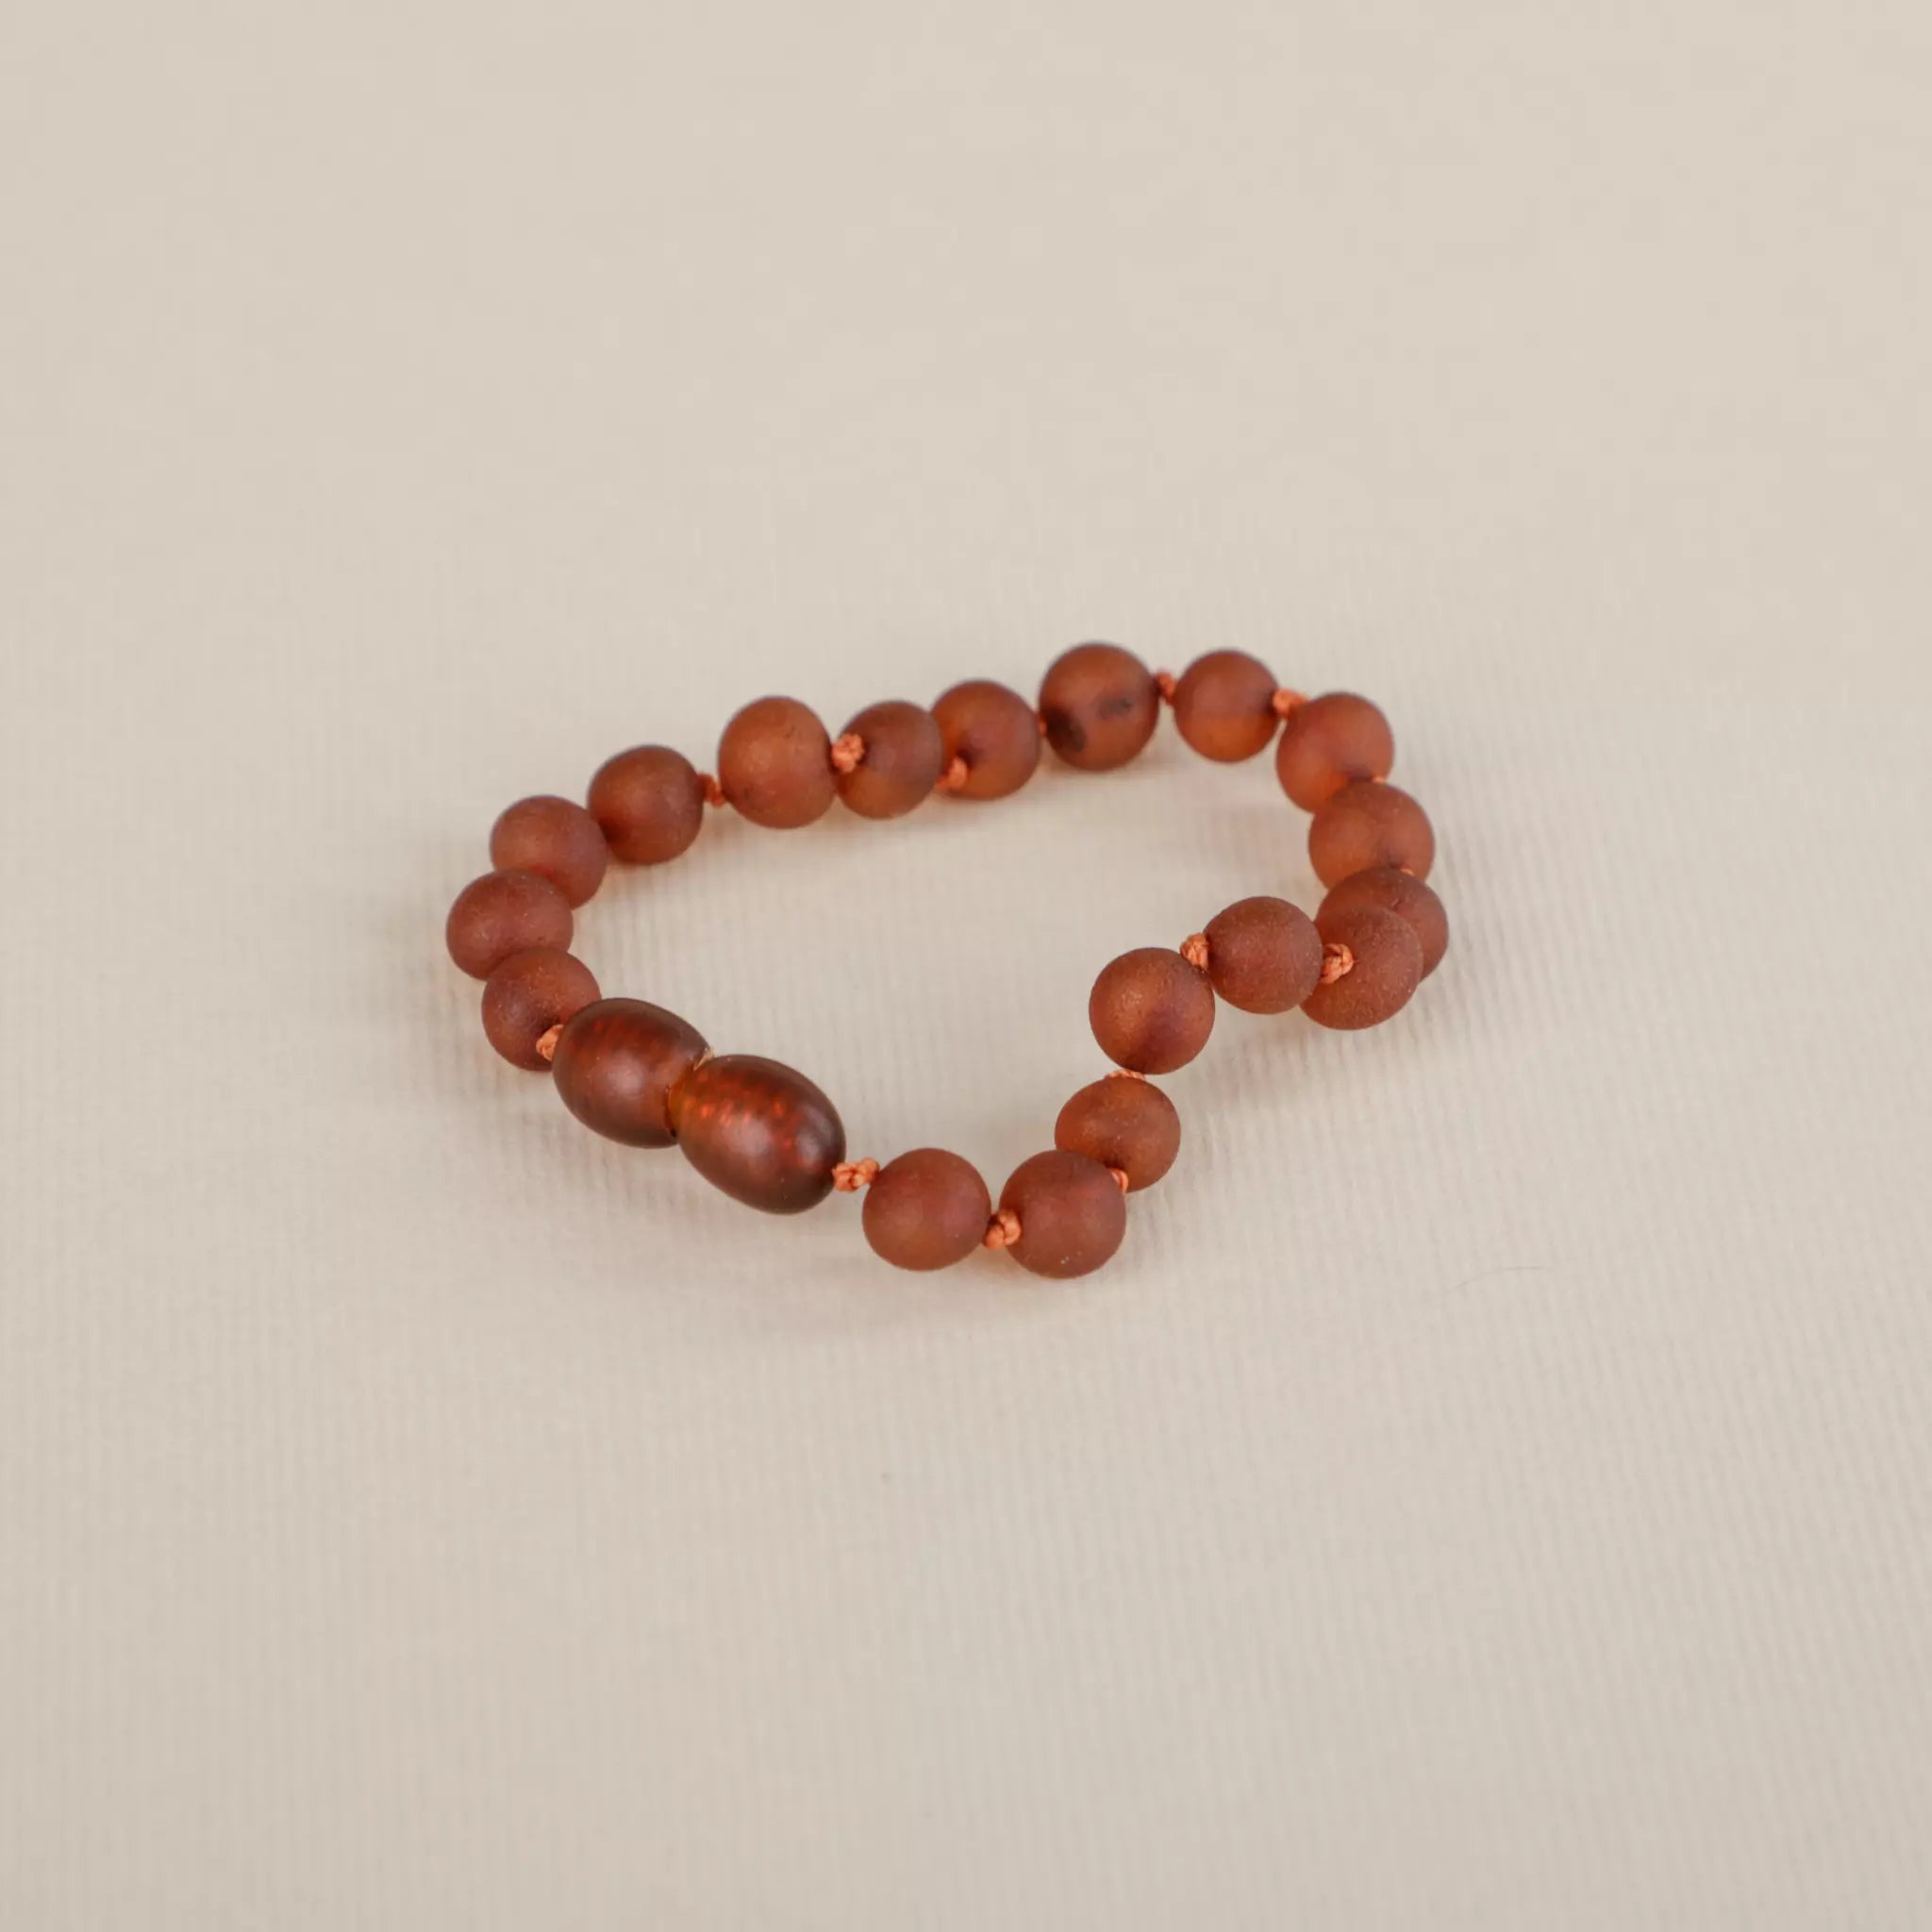 Amber Teething Bracelet With Matching Necklace For Mom.